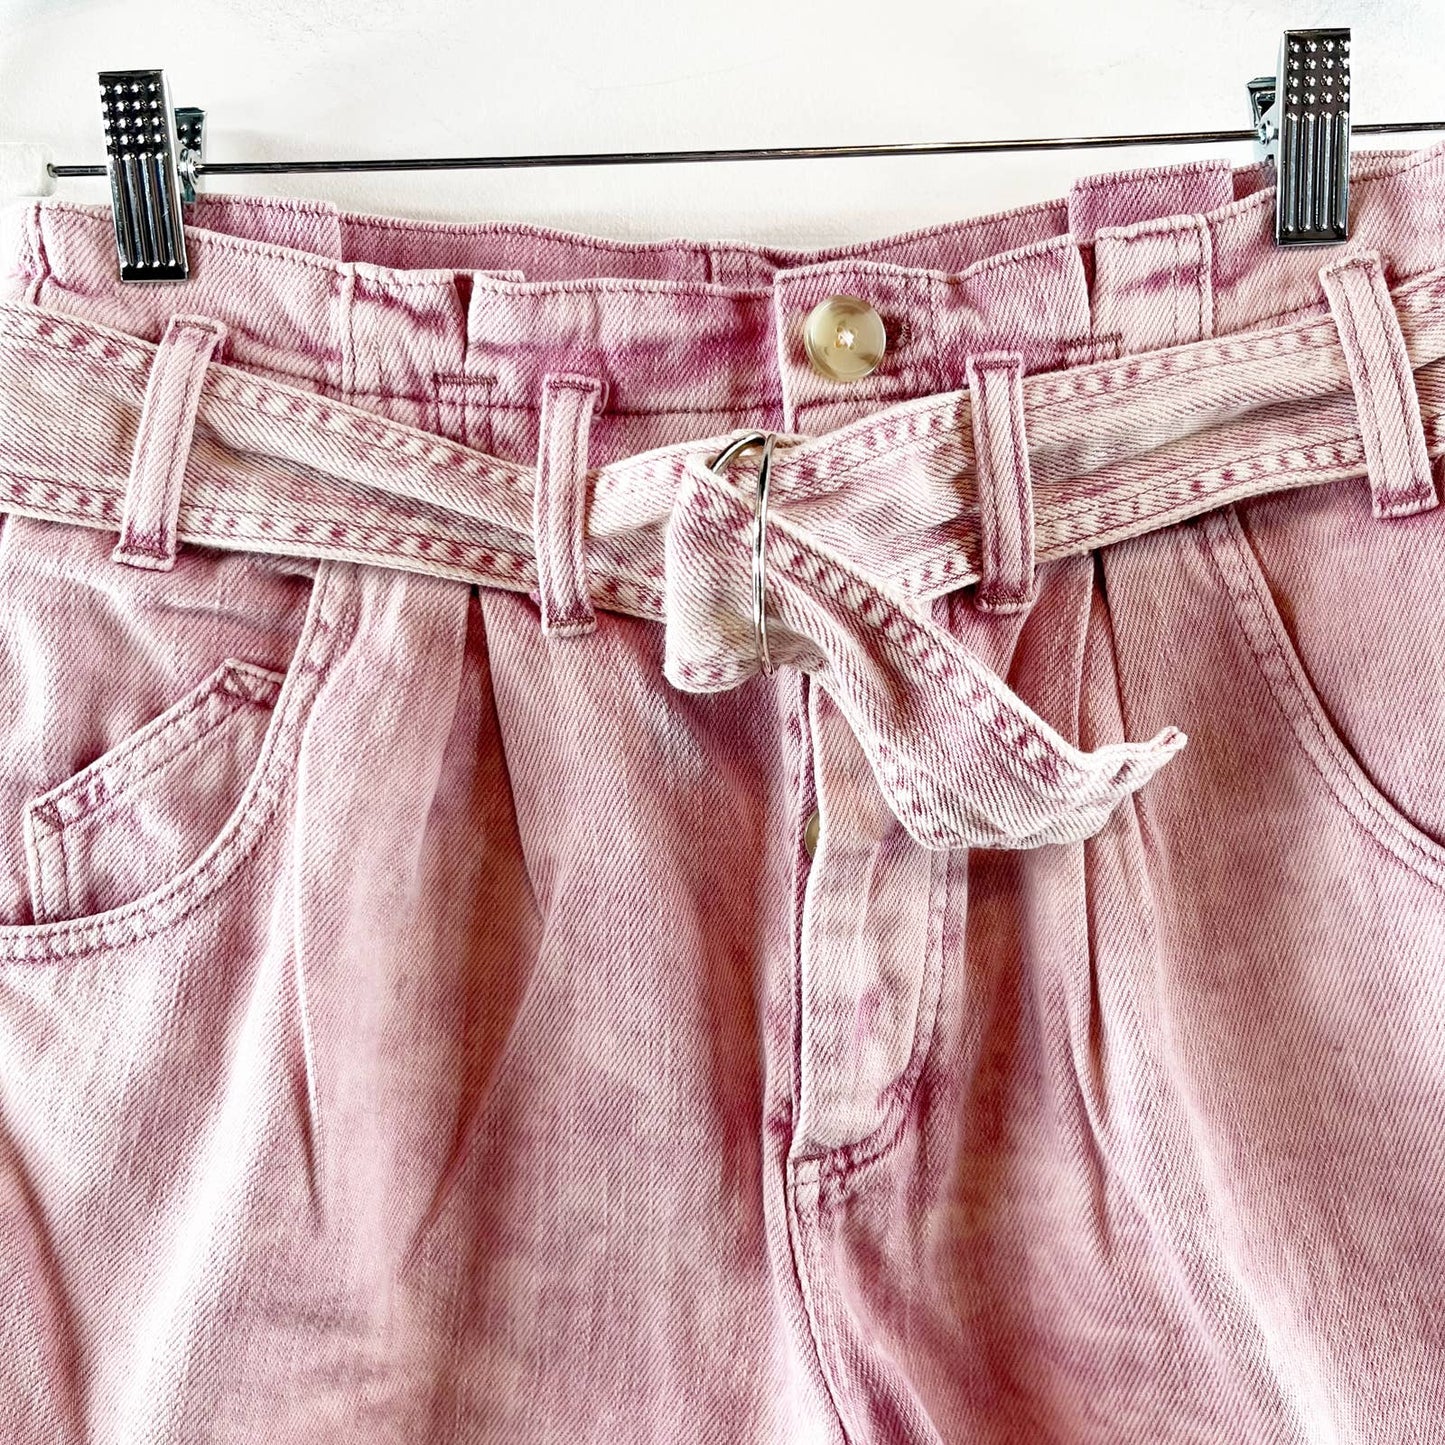 Free People We The Free Jungle Flower See You Sometime Denim Shorts Pink XS